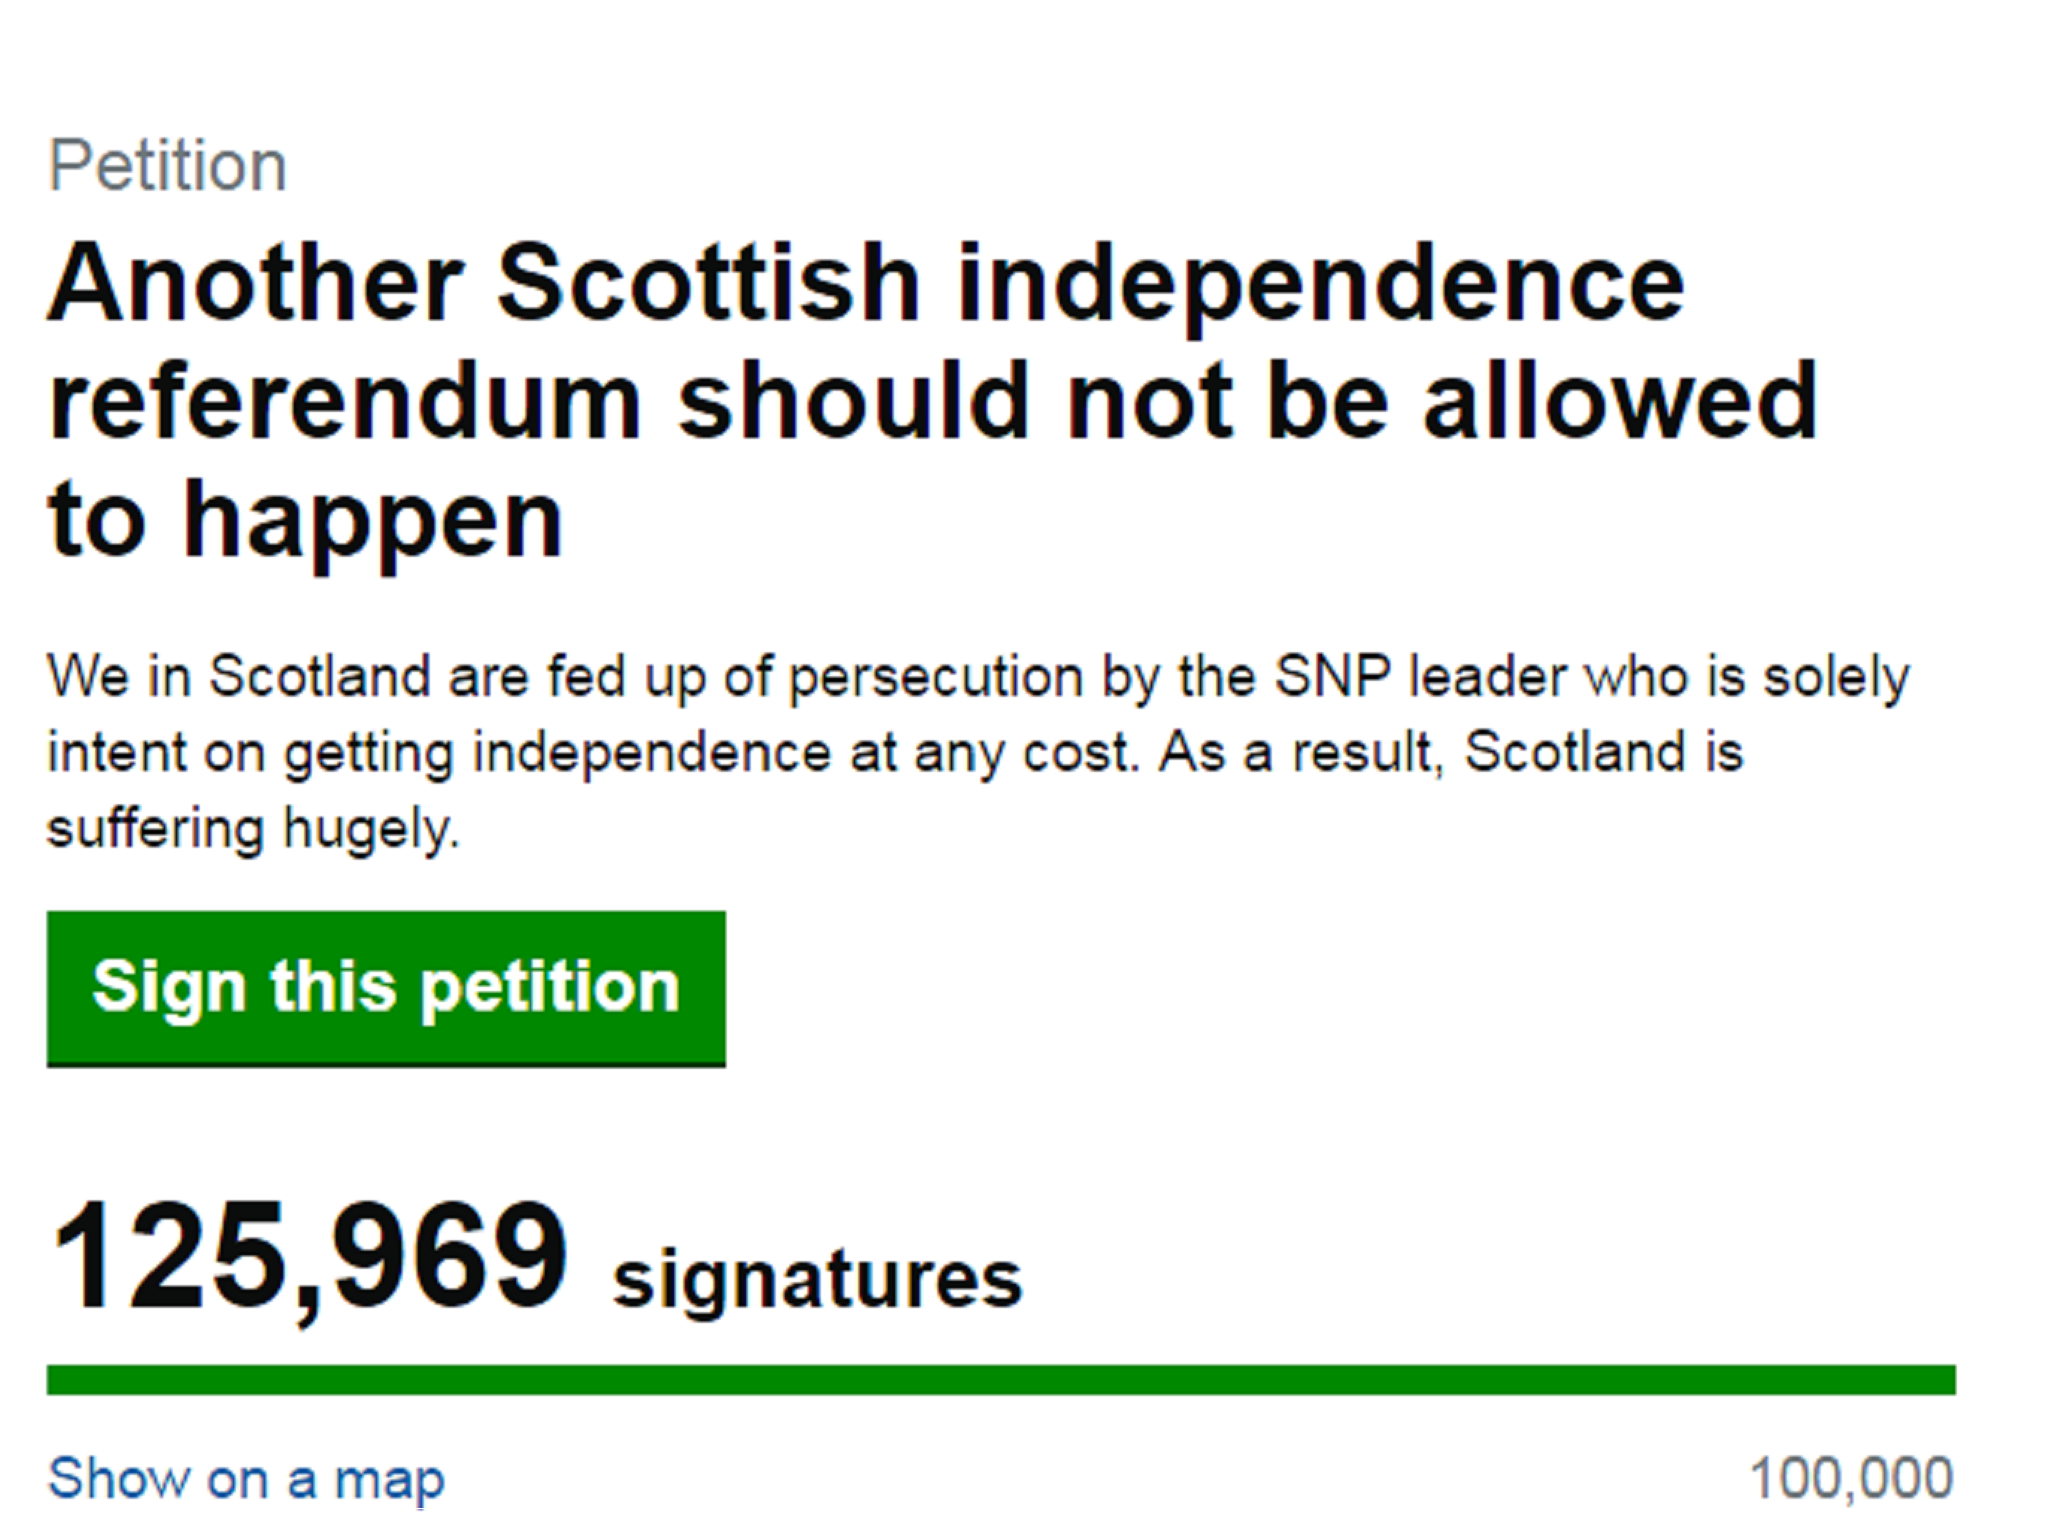 The petition claims a focus on independence is harming Scotland as a whole